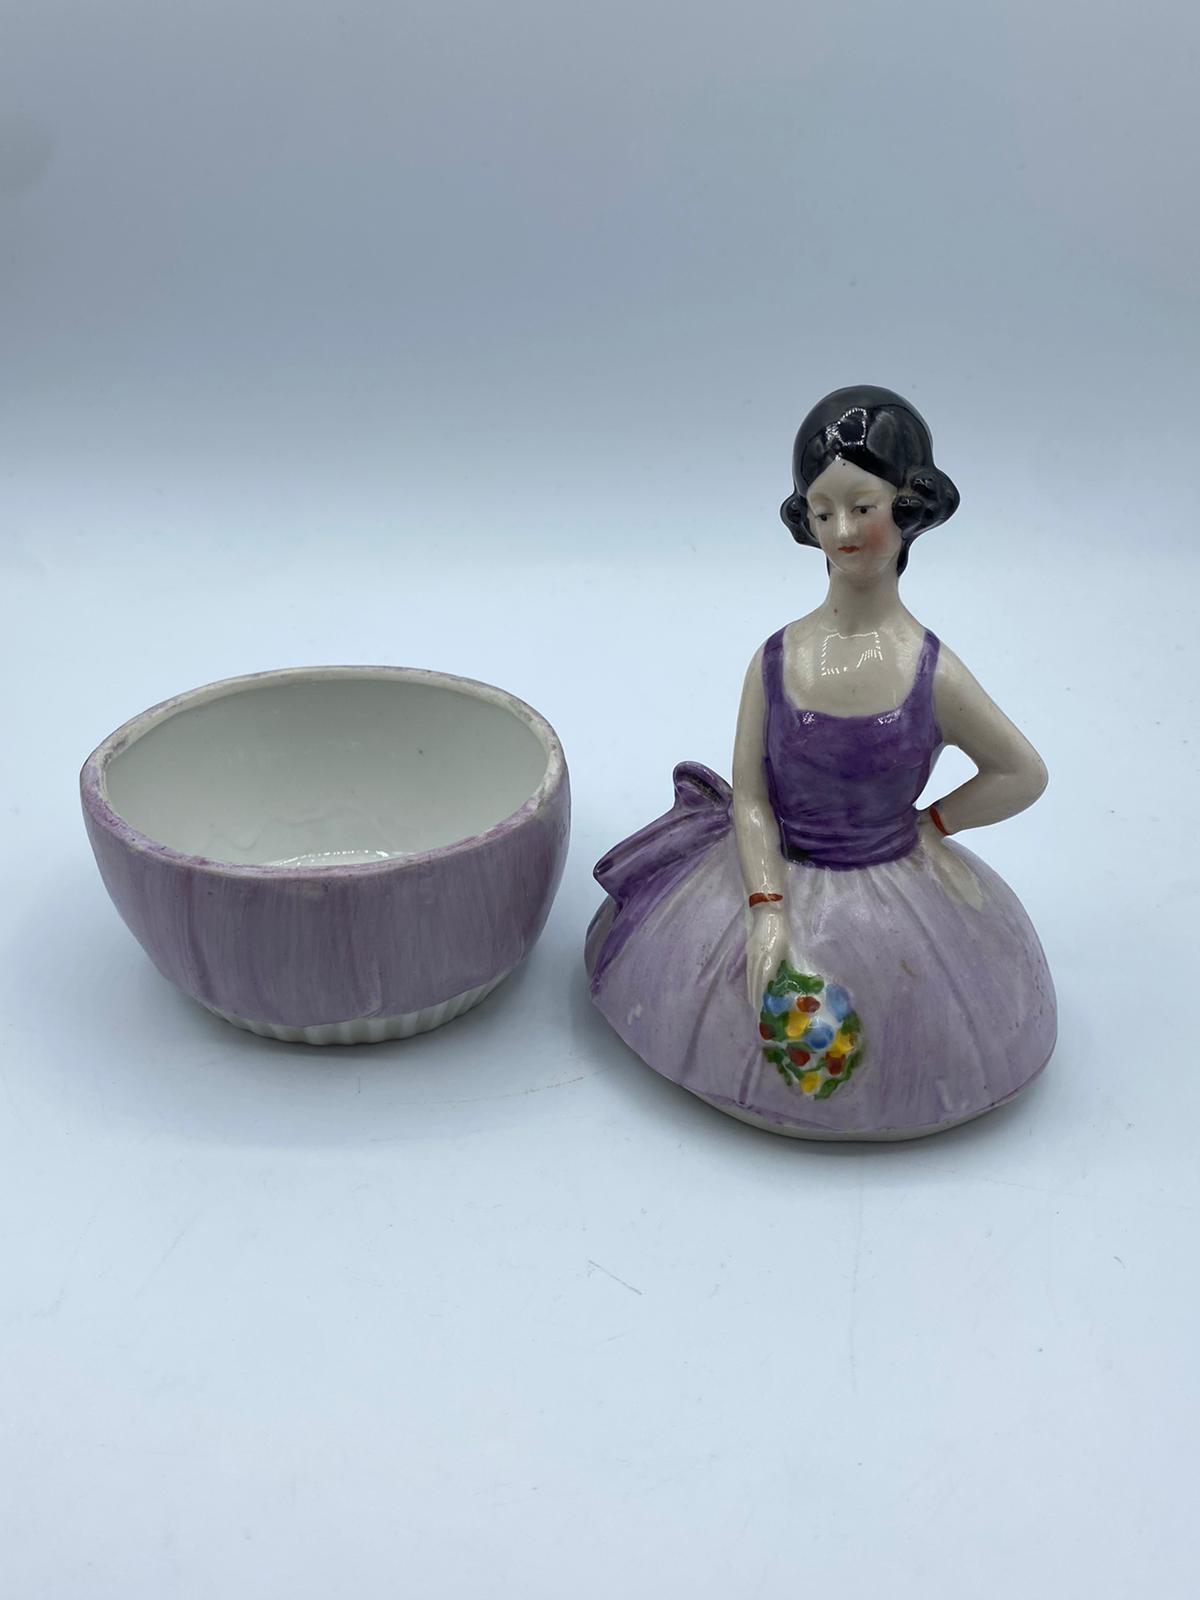 Vintage pair of Ceramic powder boxes in the form of ladies in orange and purple ballgown dresses - Image 7 of 20